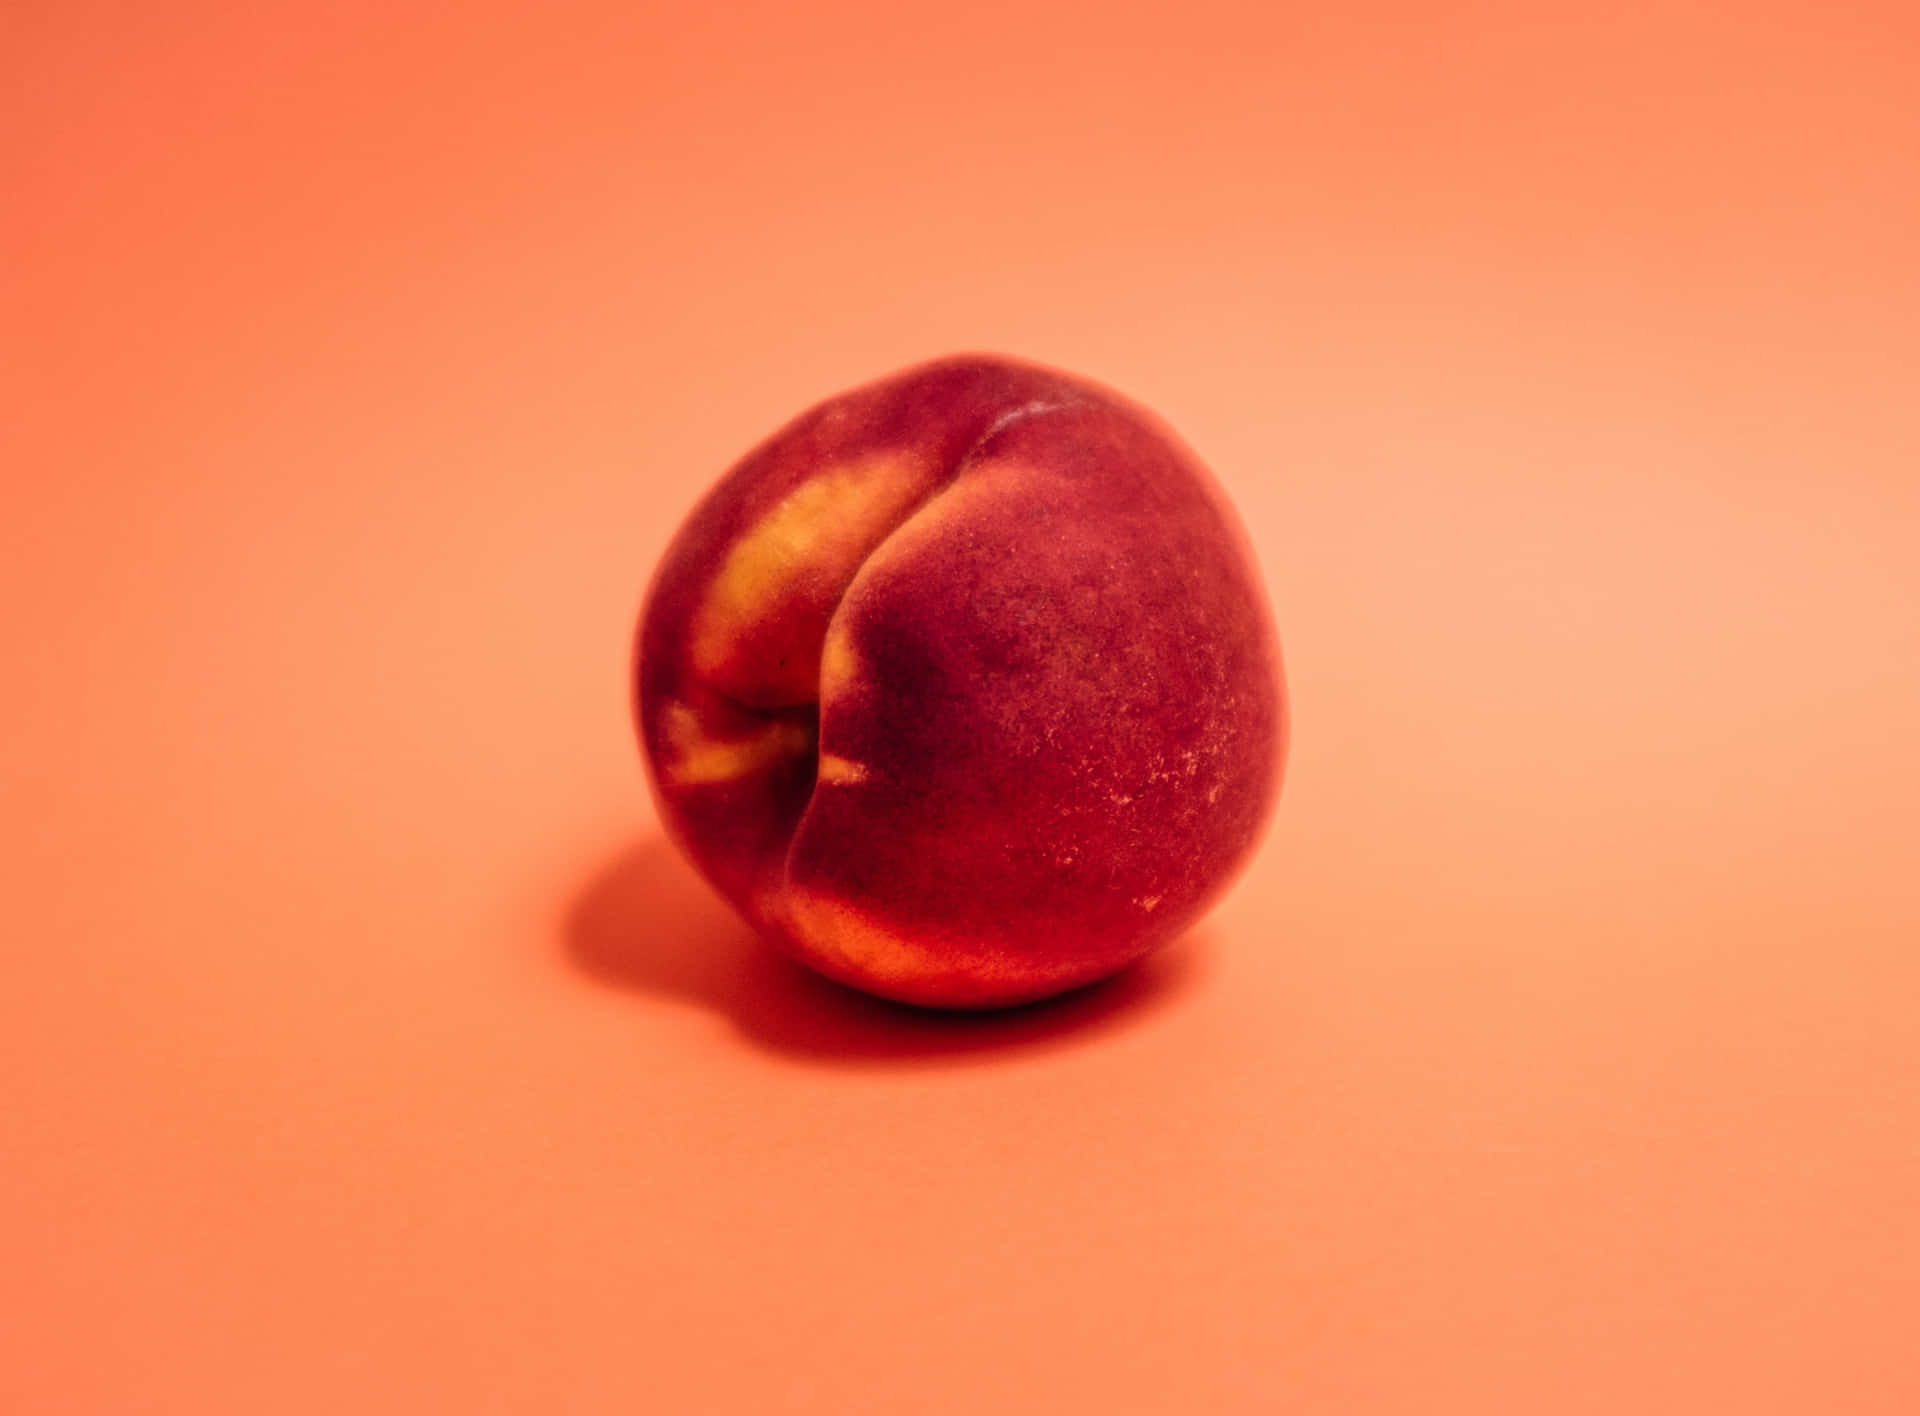 A Peach On A Red Background